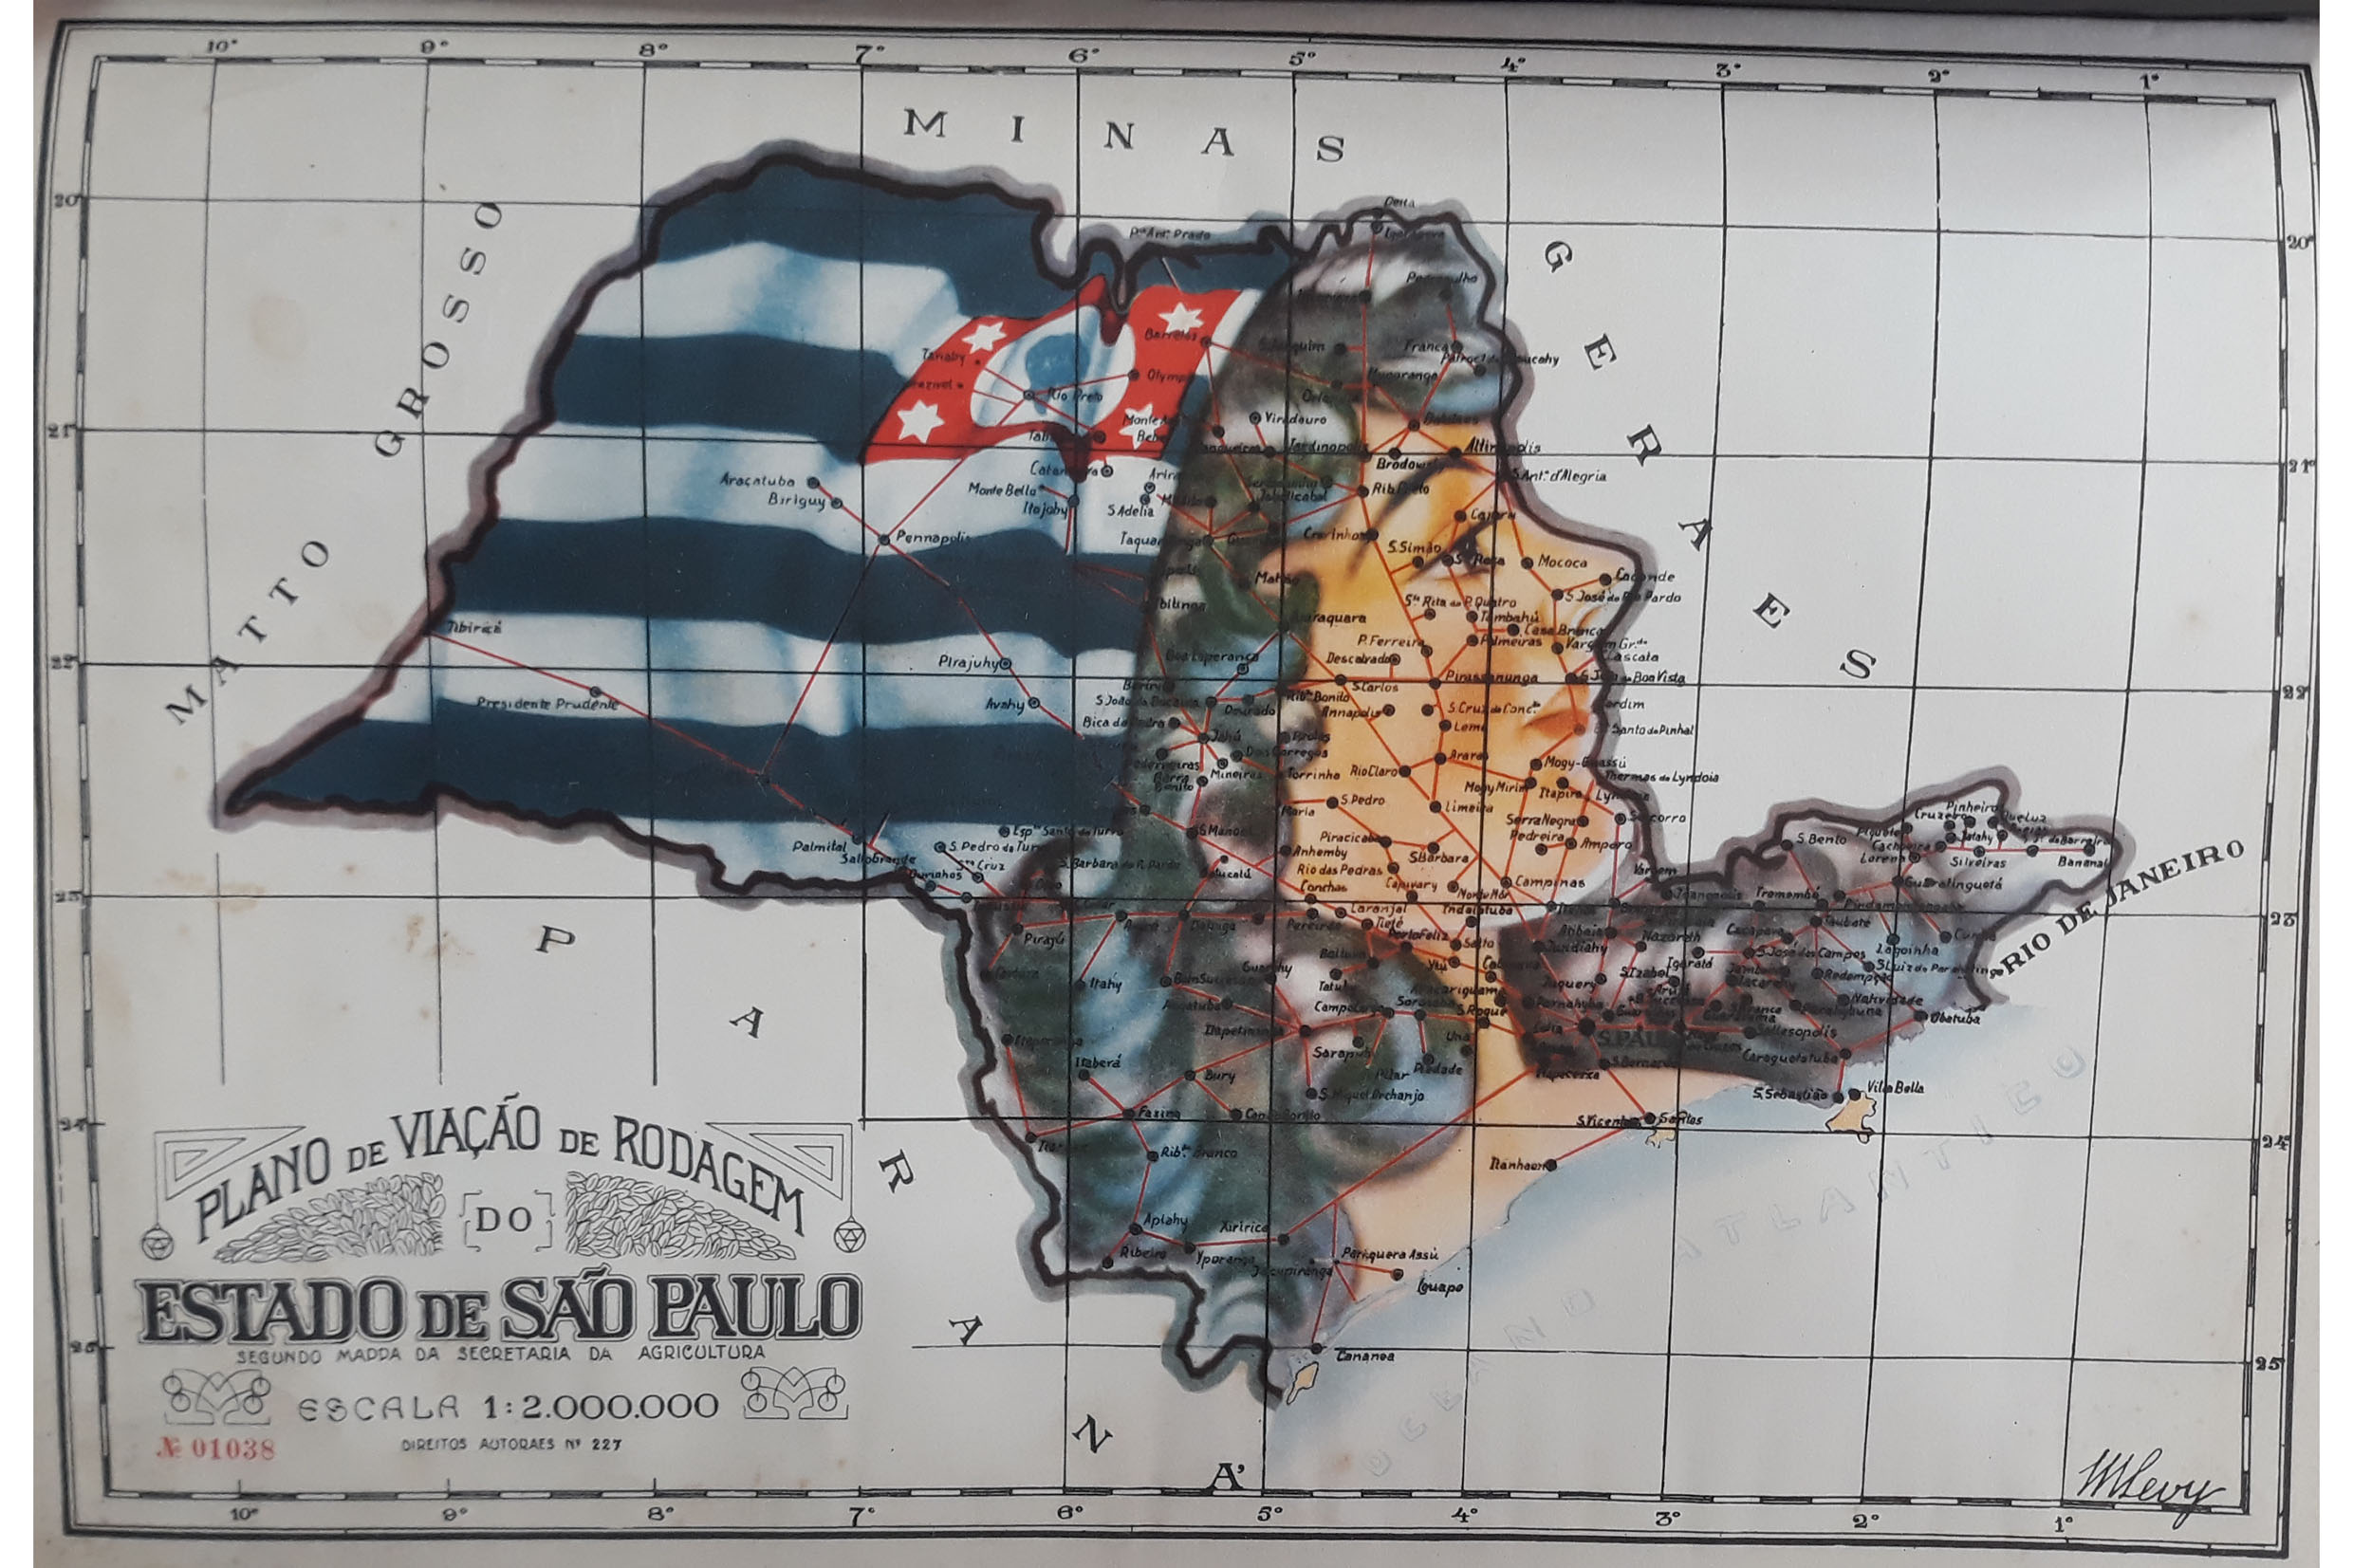 Mapa de So Paulo<a style='float:right' href='https://www3.al.sp.gov.br/repositorio/noticia/N-07-2020/fg251019.jpg' target=_blank><img src='/_img/material-file-download-white.png' width='14px' alt='Clique para baixar a imagem'></a>